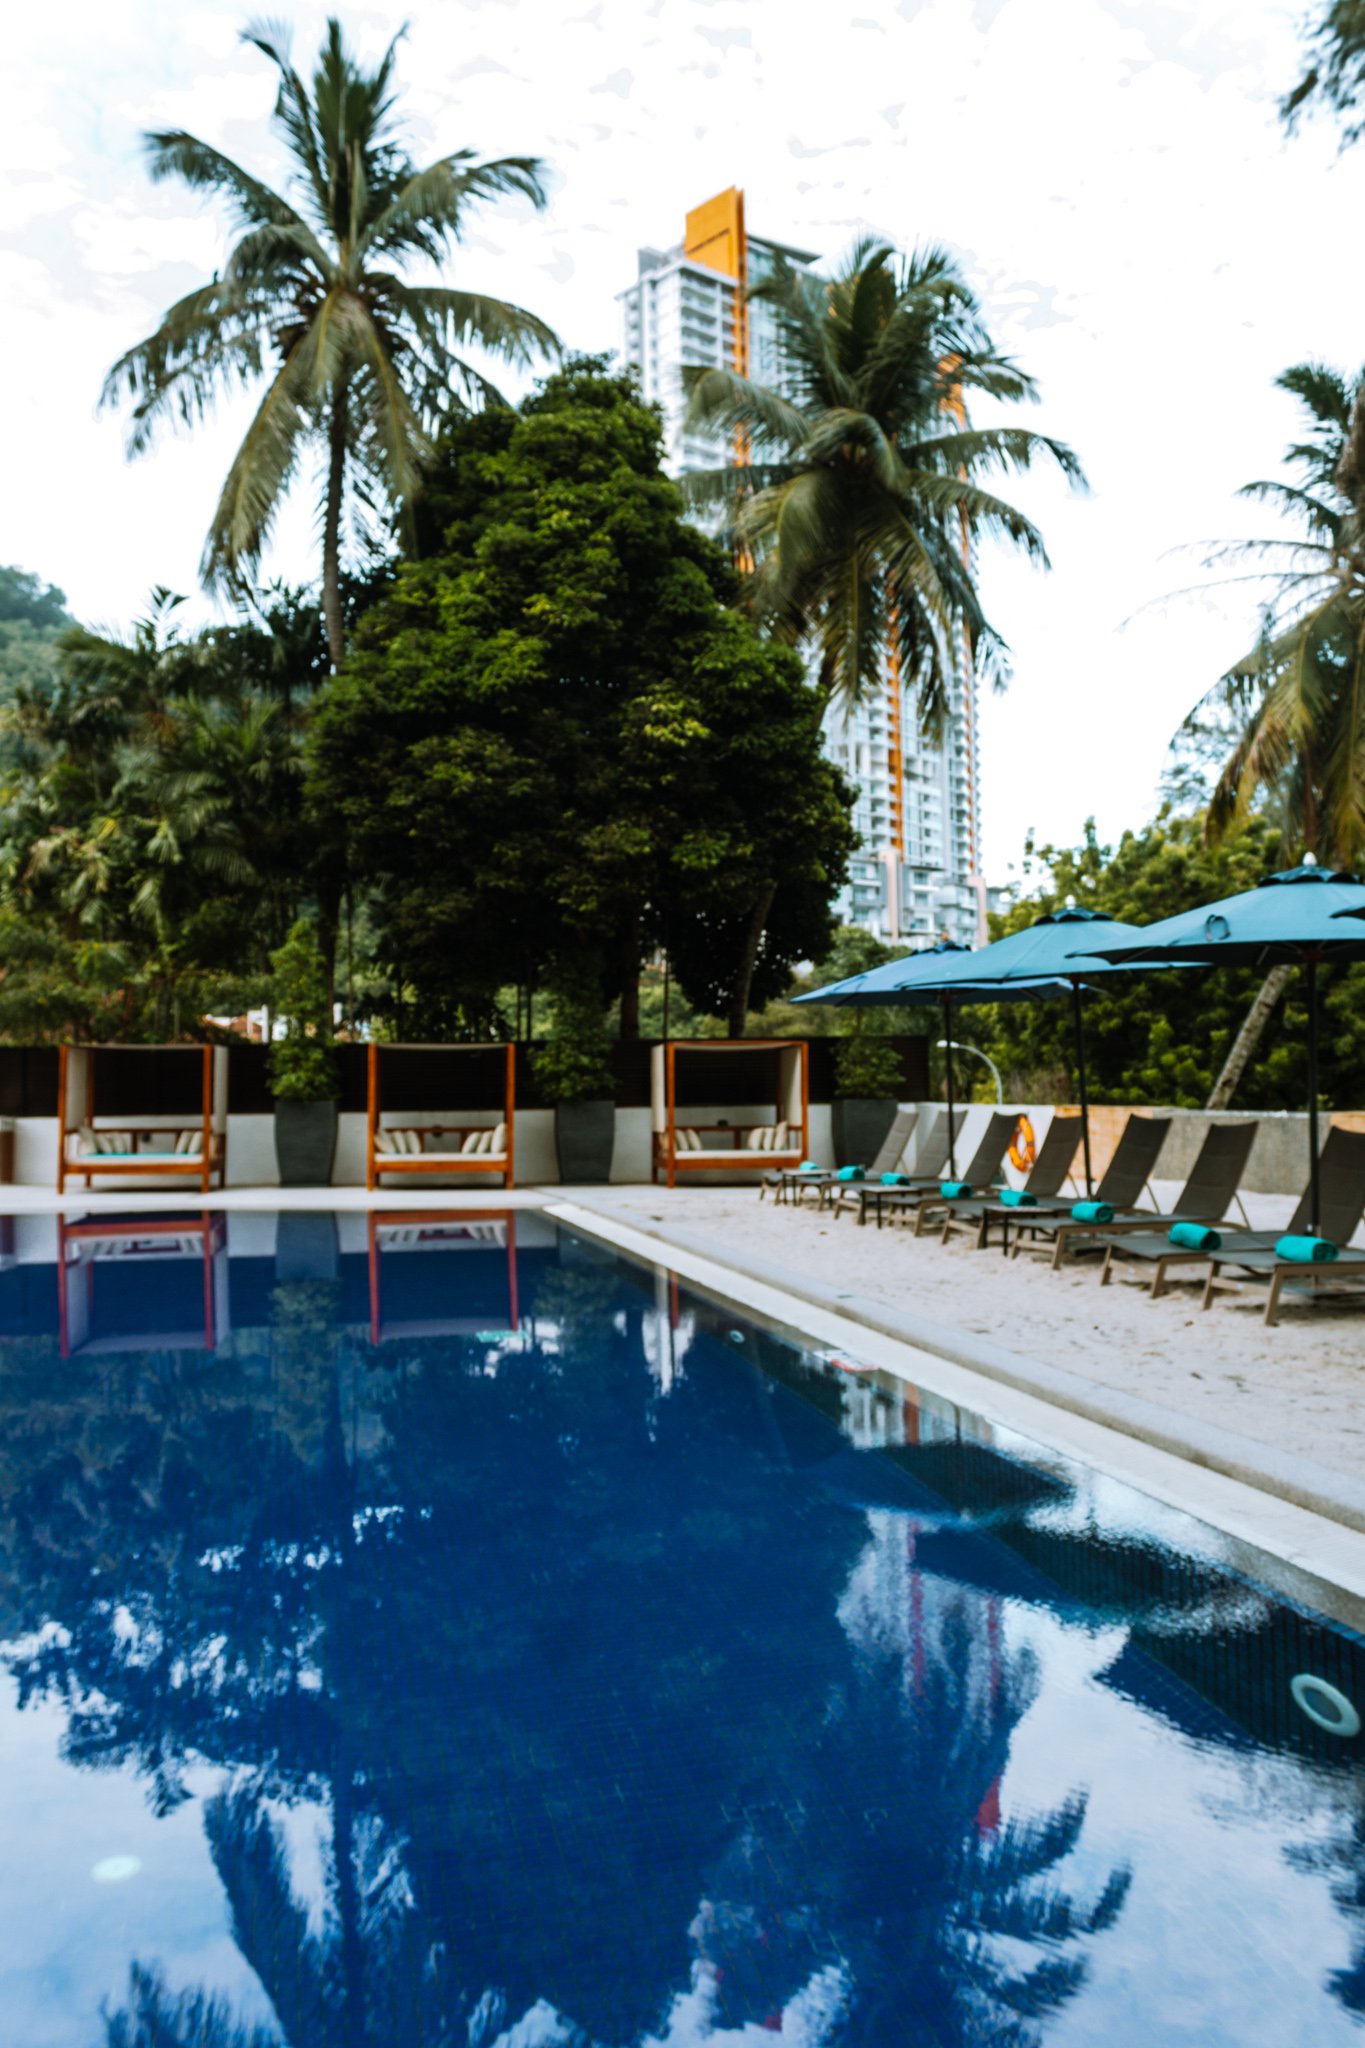 The pool at DoubleTree Resort by Hilton, Penang, Malaysia